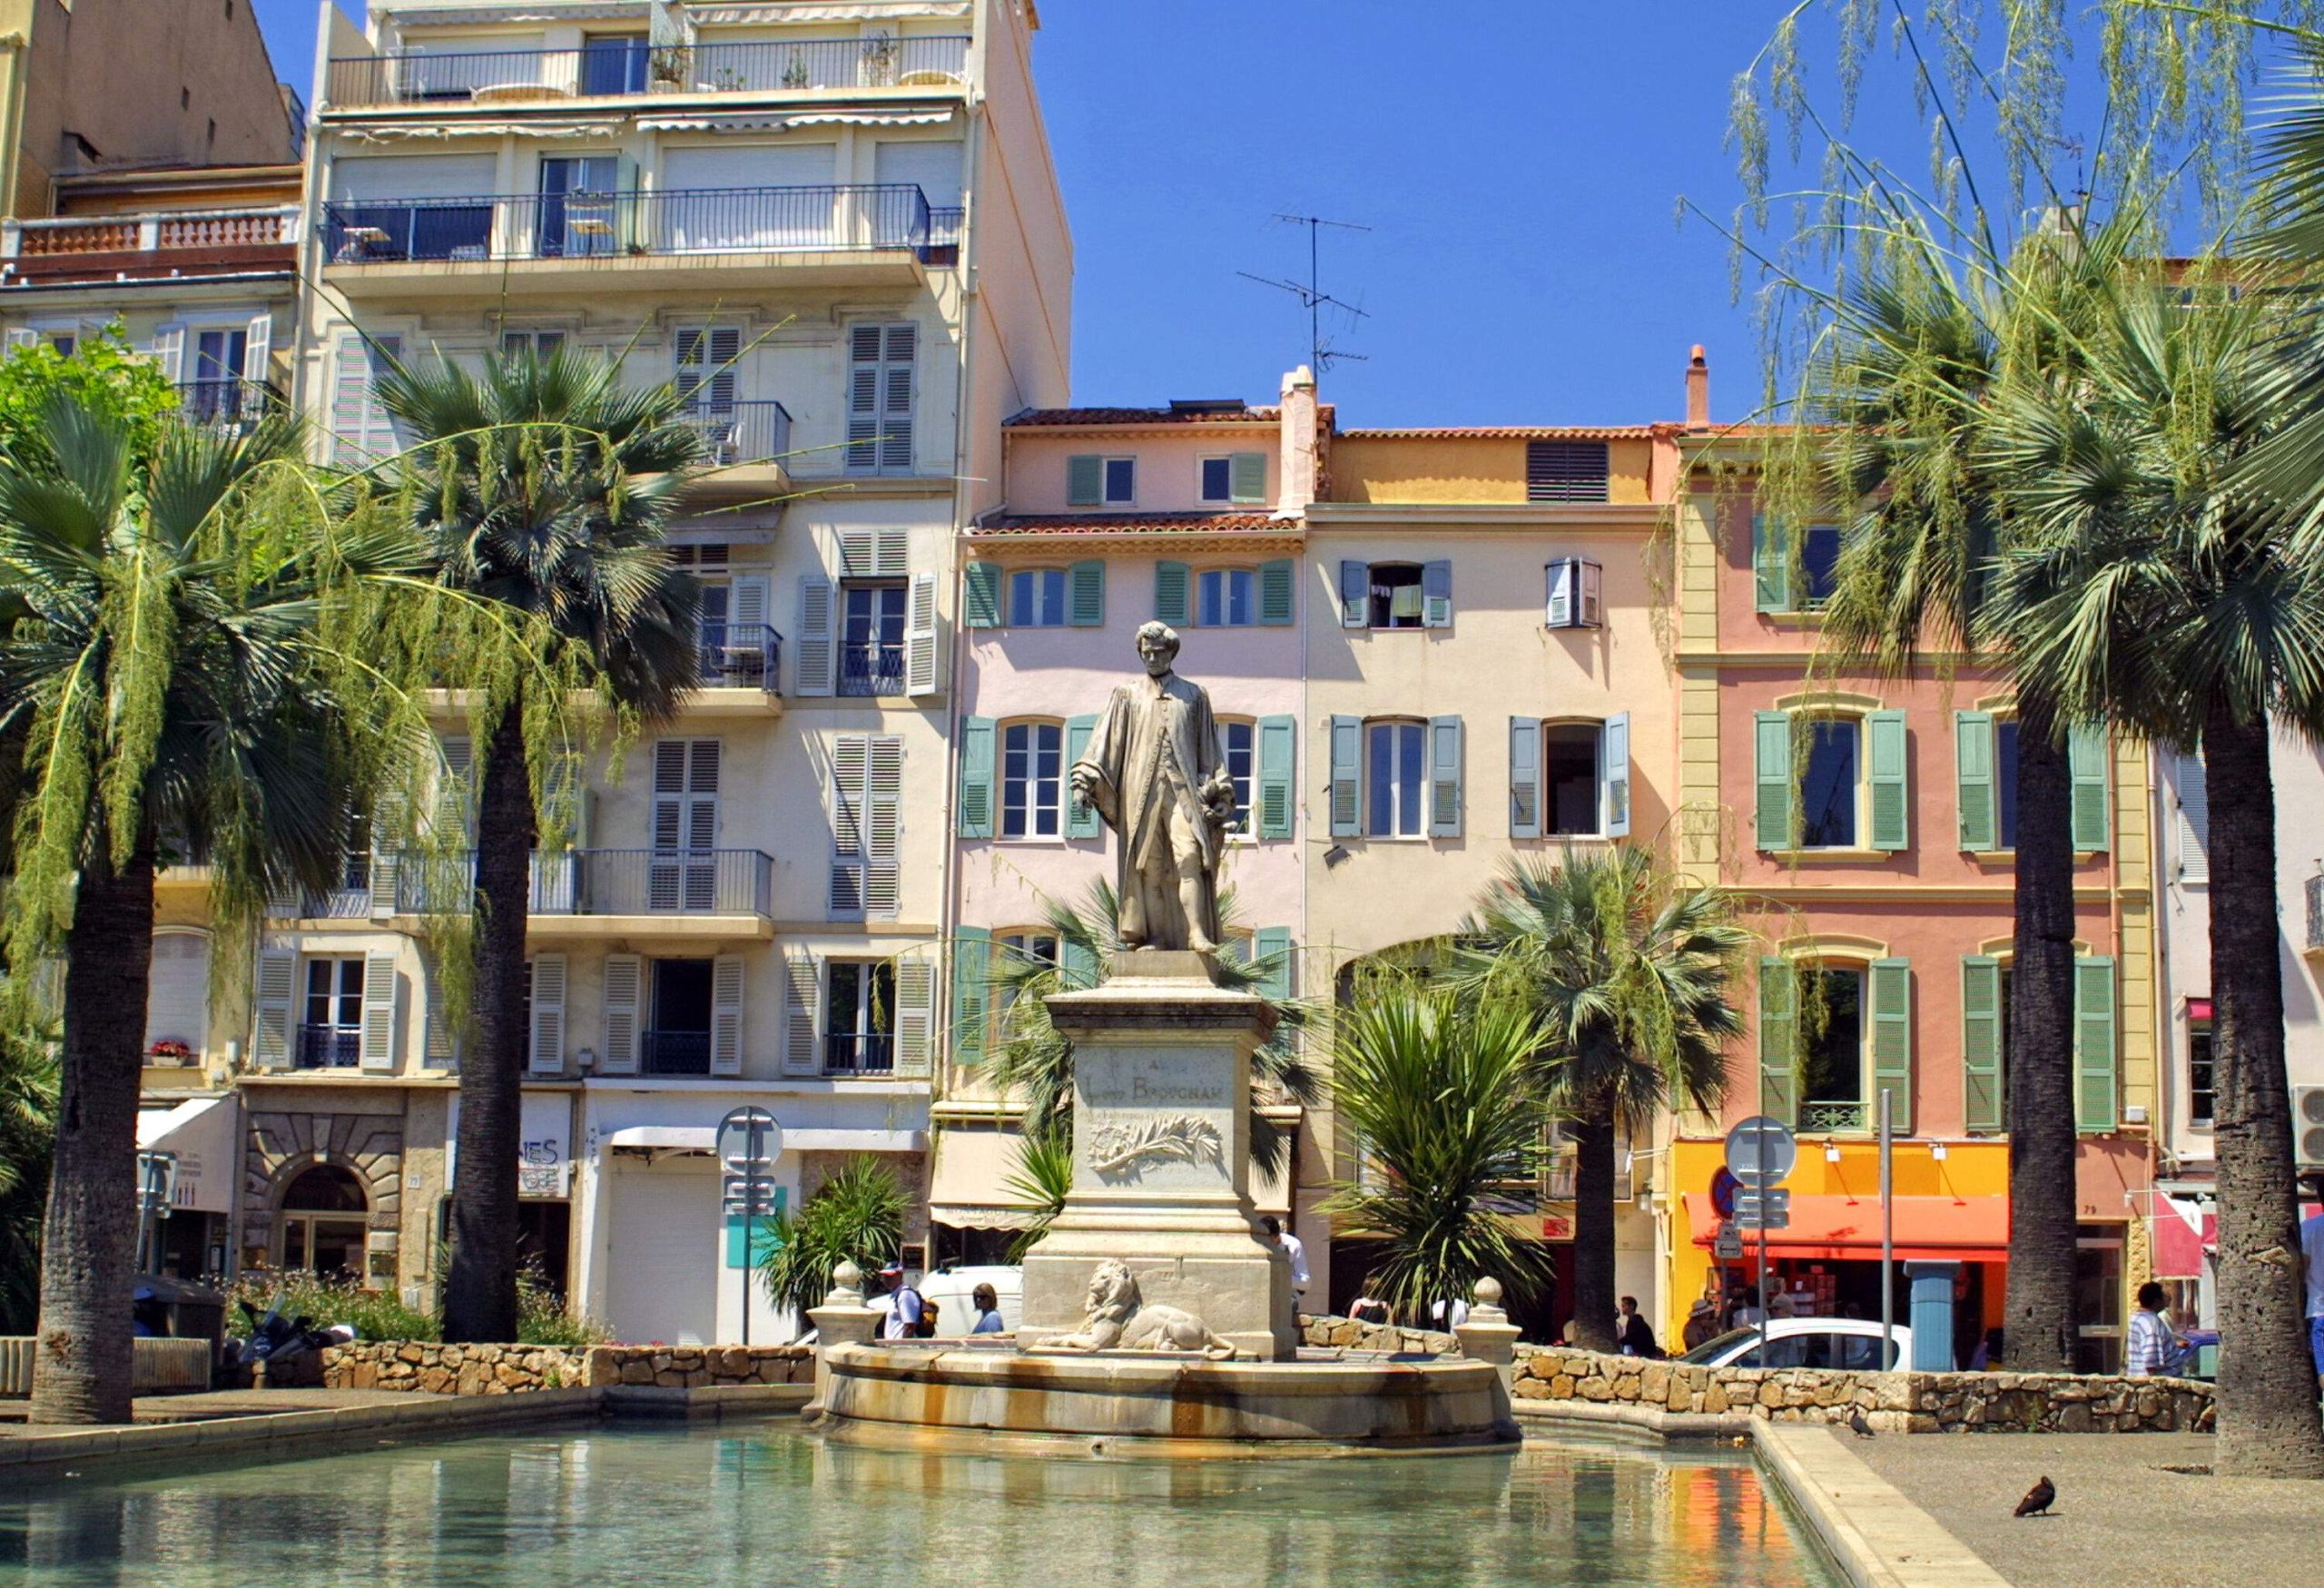 A statue above a lion over a pond surrounded by palm trees alongside a line of colourful buildings.